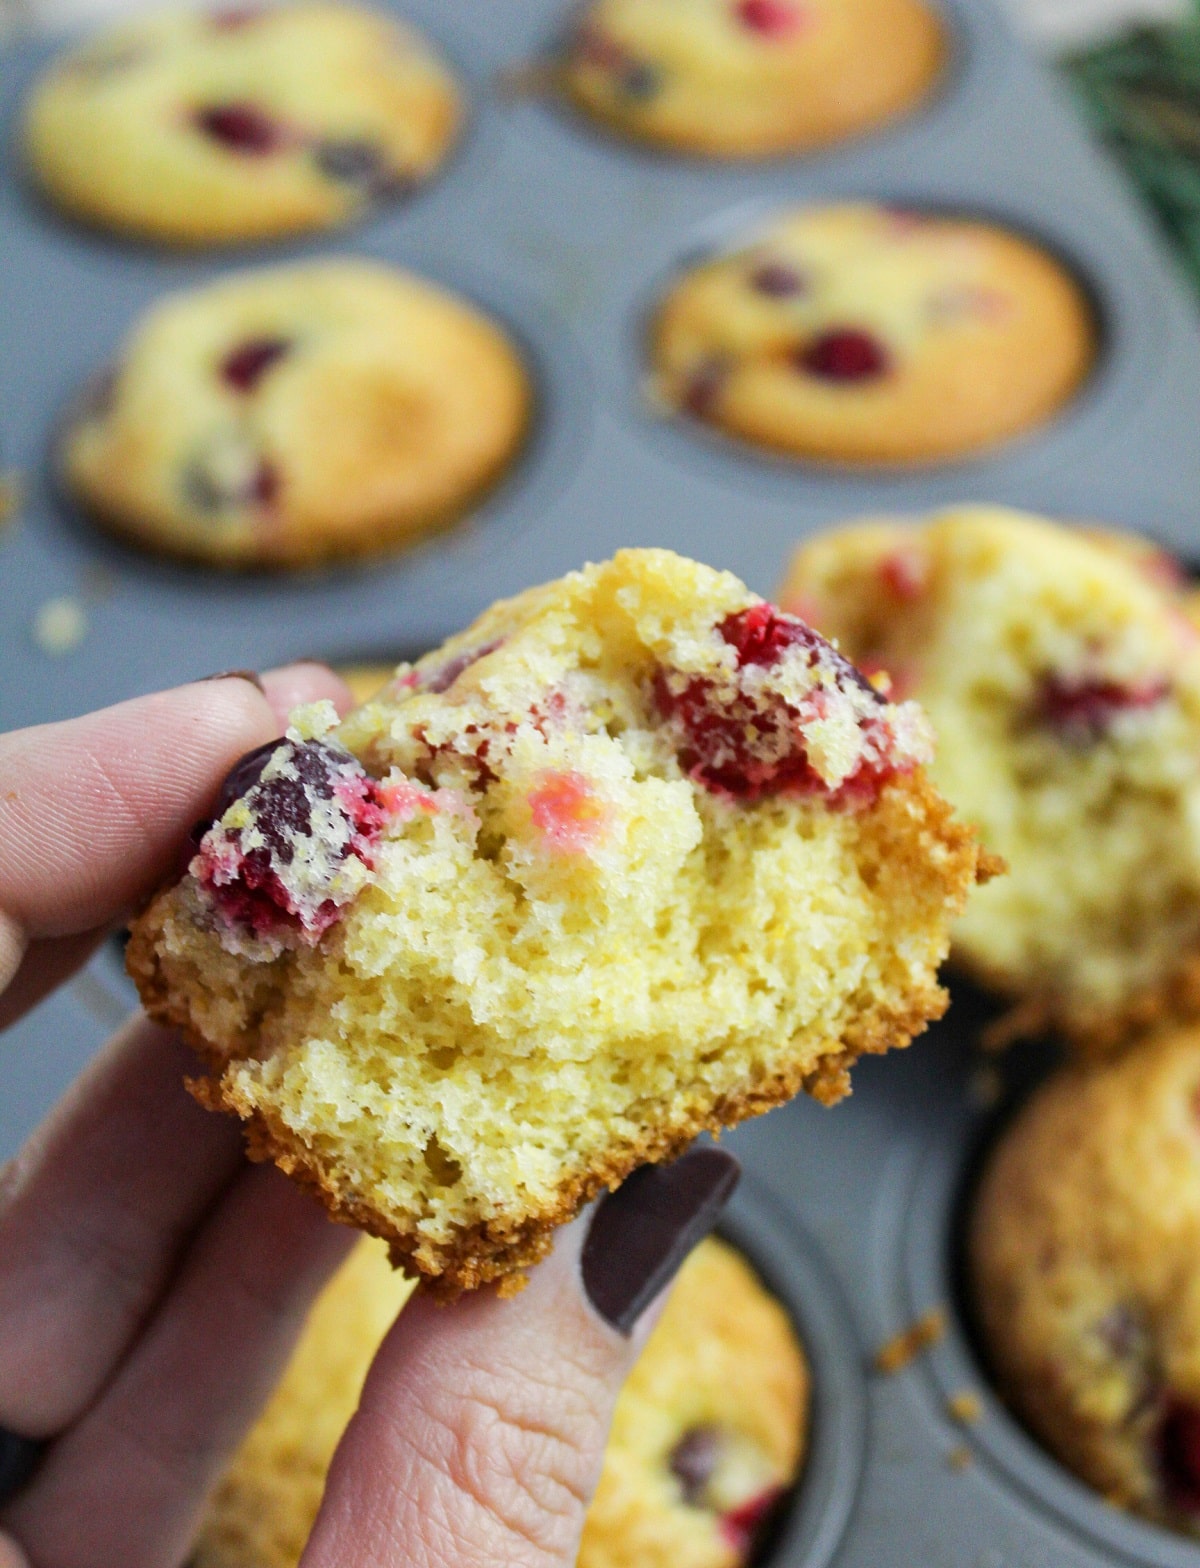 muffin held in hand. Golden brown and topped with fresh cranberries.